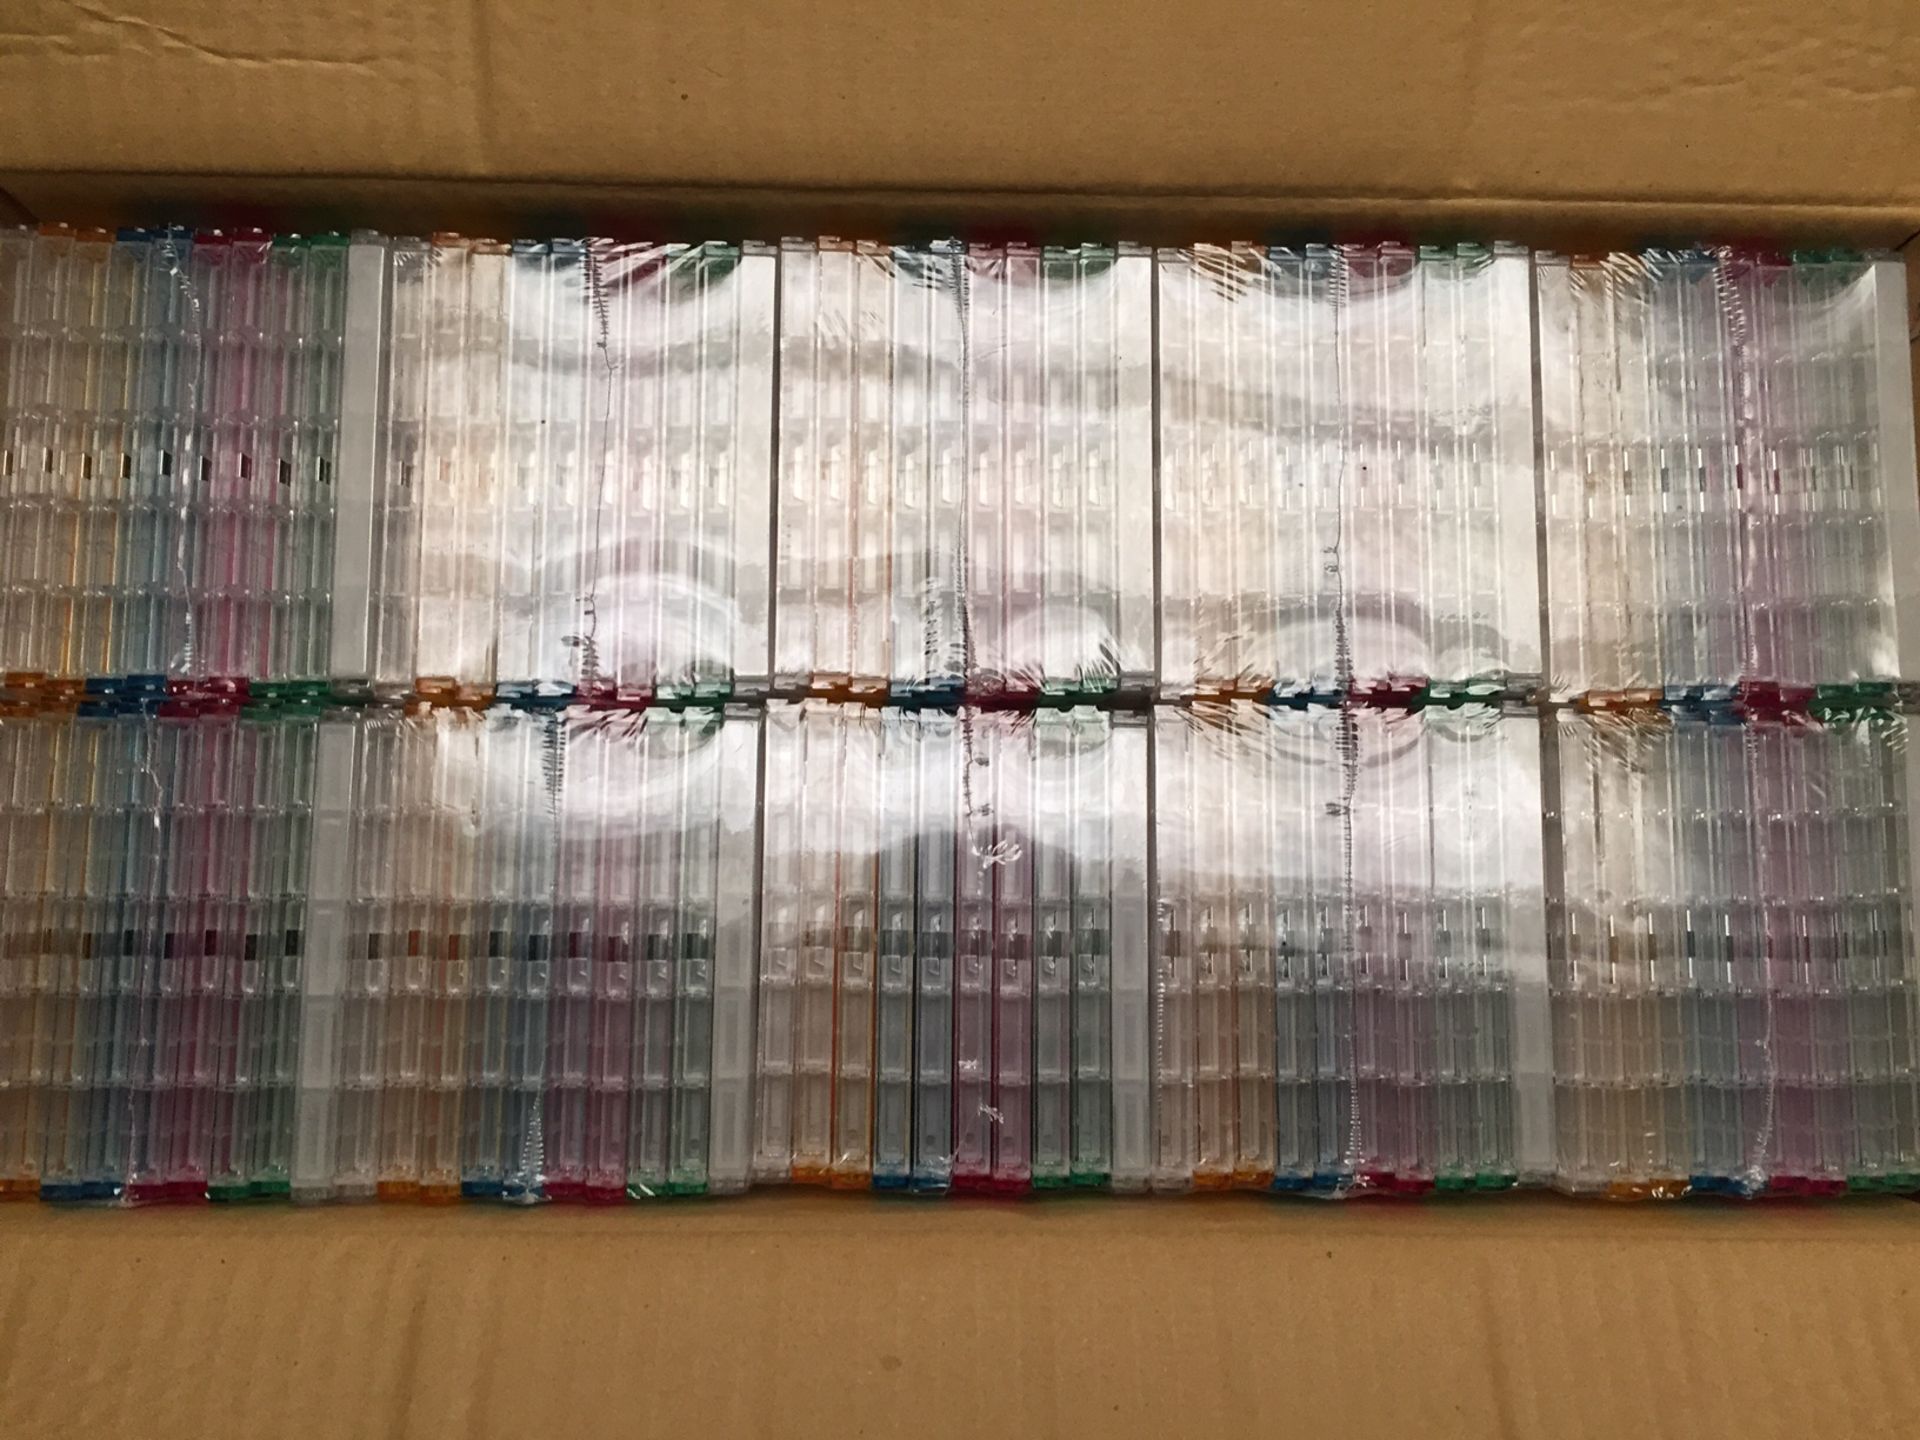 3 x Boxes of Compucessory Interlocking Jewel Cases Code 95502 - 300 Cases in Total (RRP £7.60 Each) - Image 2 of 4